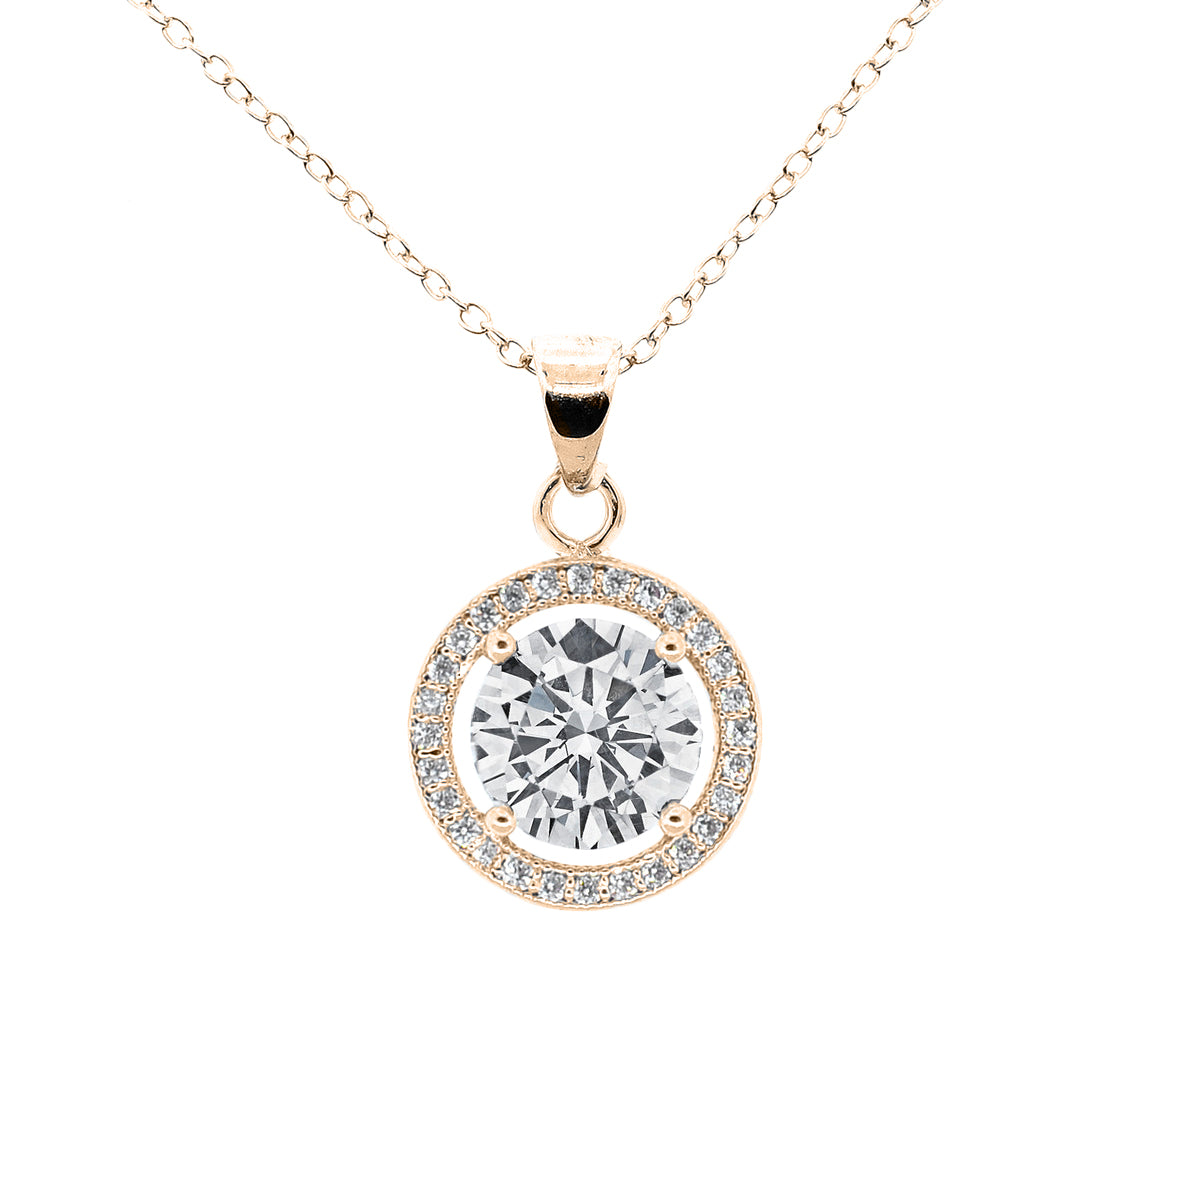 Blake 18k White Gold Plated Halo Pendant Necklace with CZ Crystals